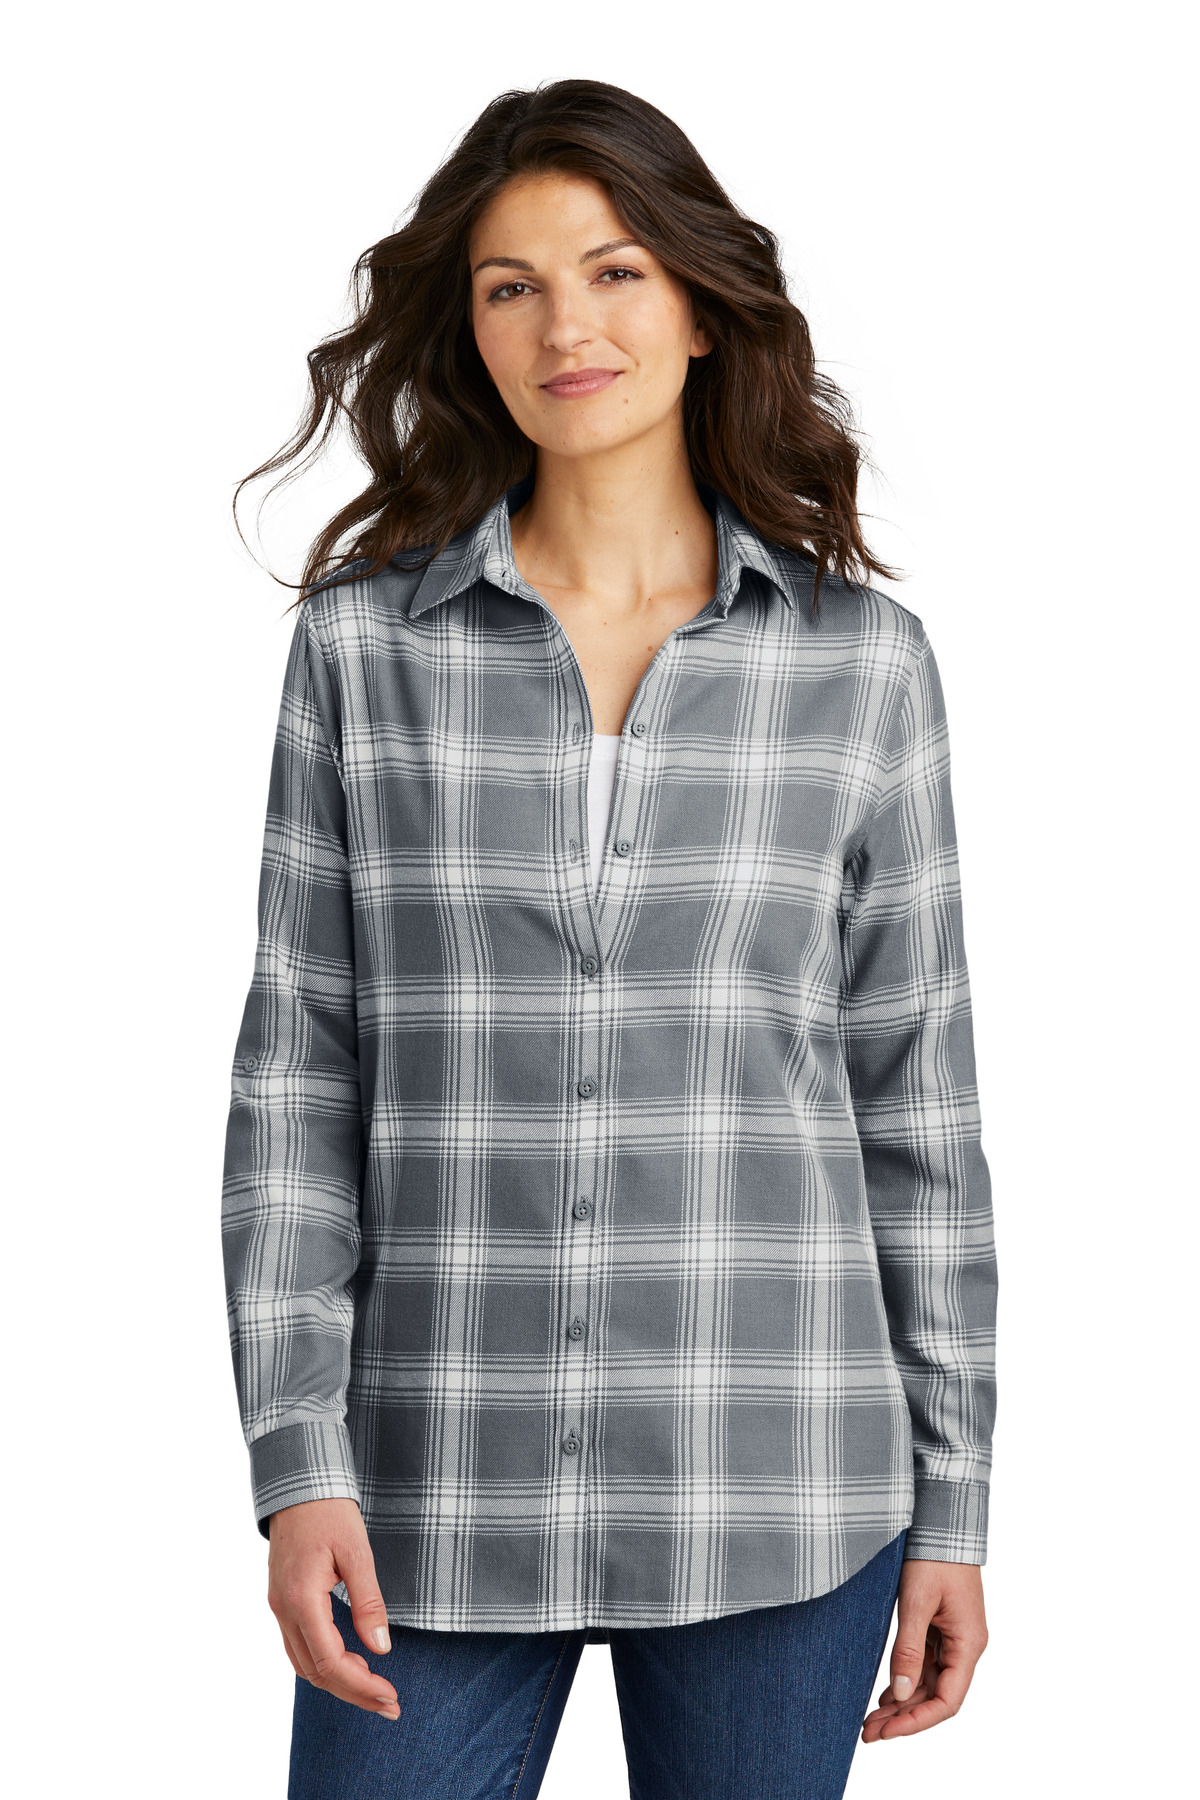 Selected Color is Grey/ Cream Open Plaid